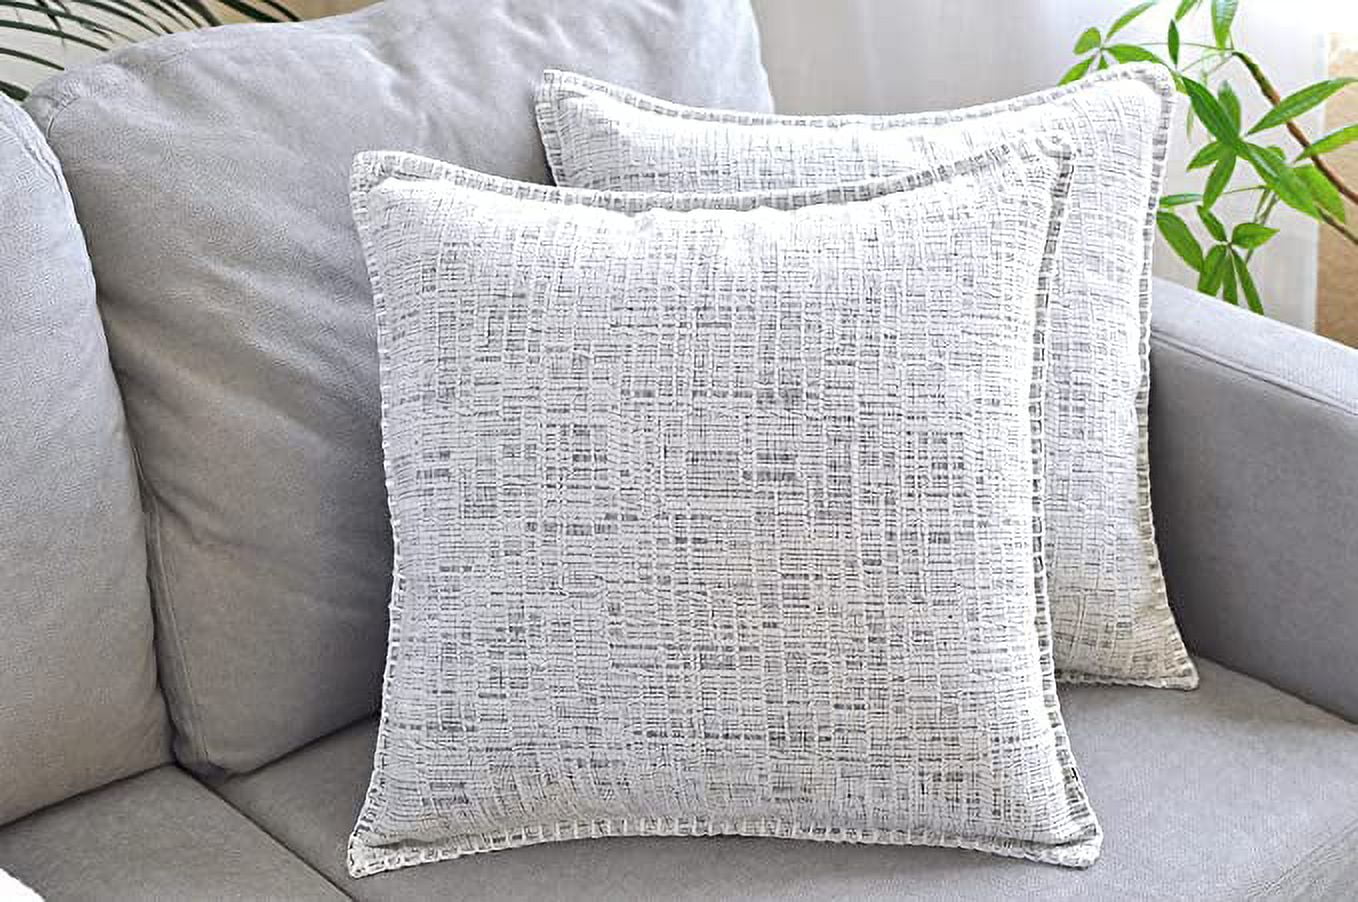 24x24 pillow covers Set of 2 Cream White & Black, Soft Textured Chenille  Throw Pillows Cases Cozy Large Cushion Covers for Couch, Modern Square Big